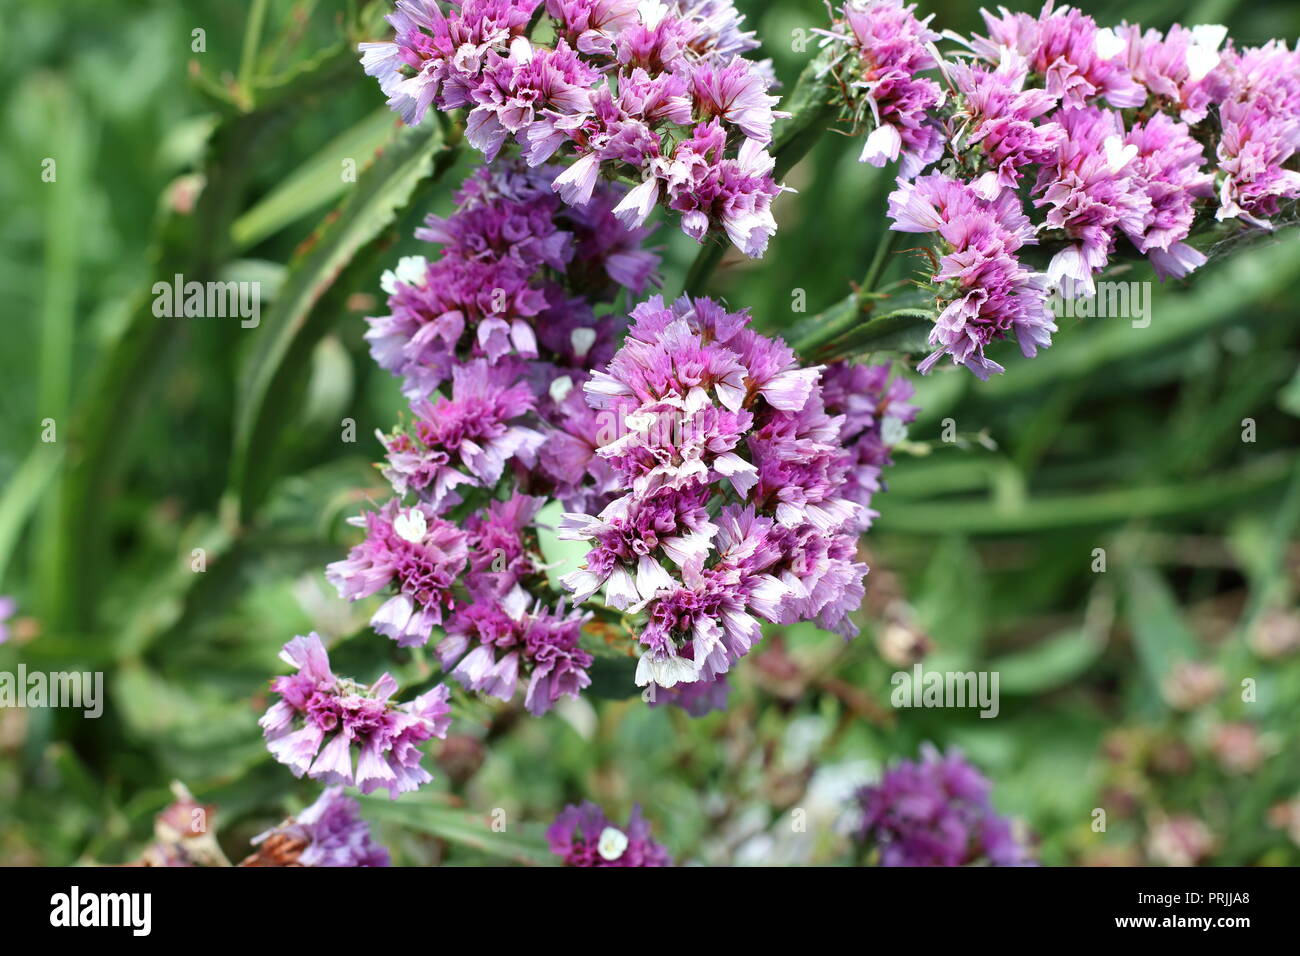 Statice flowers or also known as Limonium sinuatum, sea lavender, notch leaf marsh rosemary, sea pink, wavyleaf lavender Stock Photo